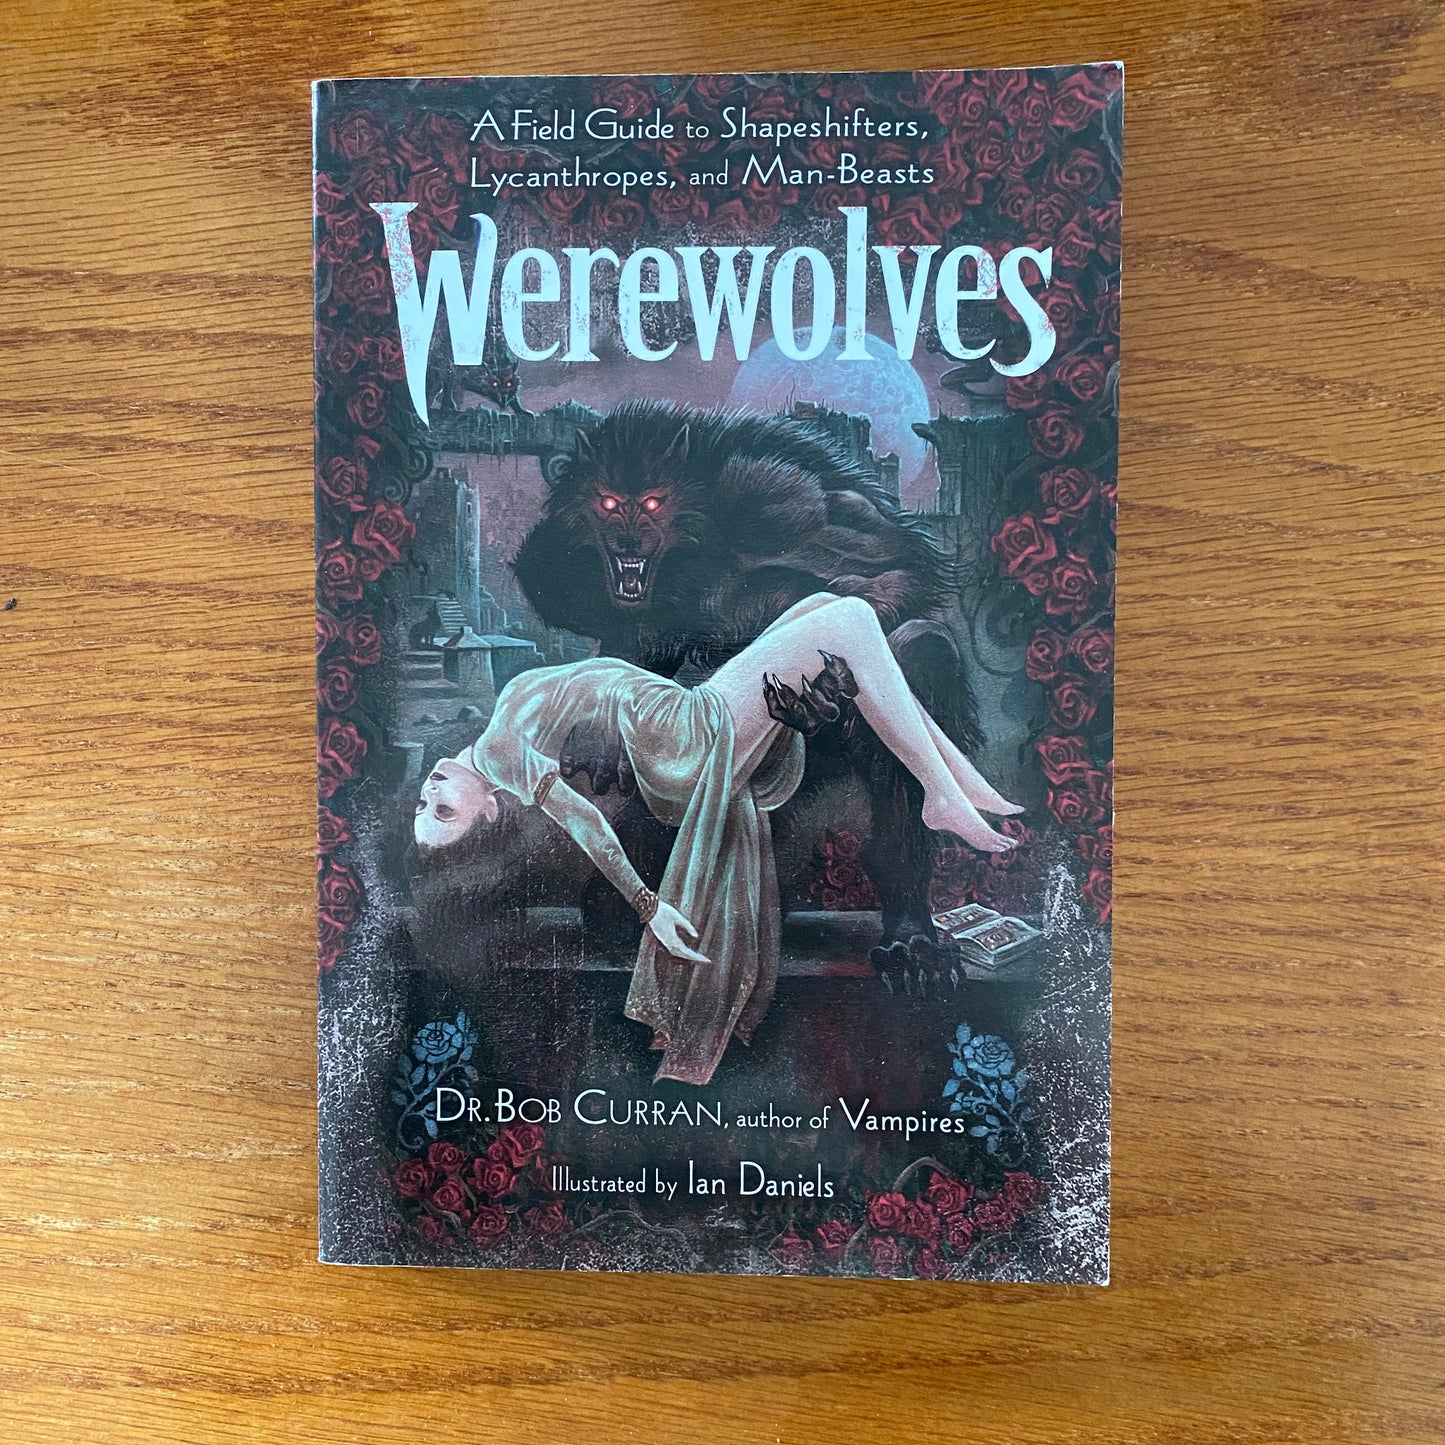 Werewolves: A Field Guide to Shapeshifters, Lycanthropes, & Man-Beasts - Dr Bob Curran